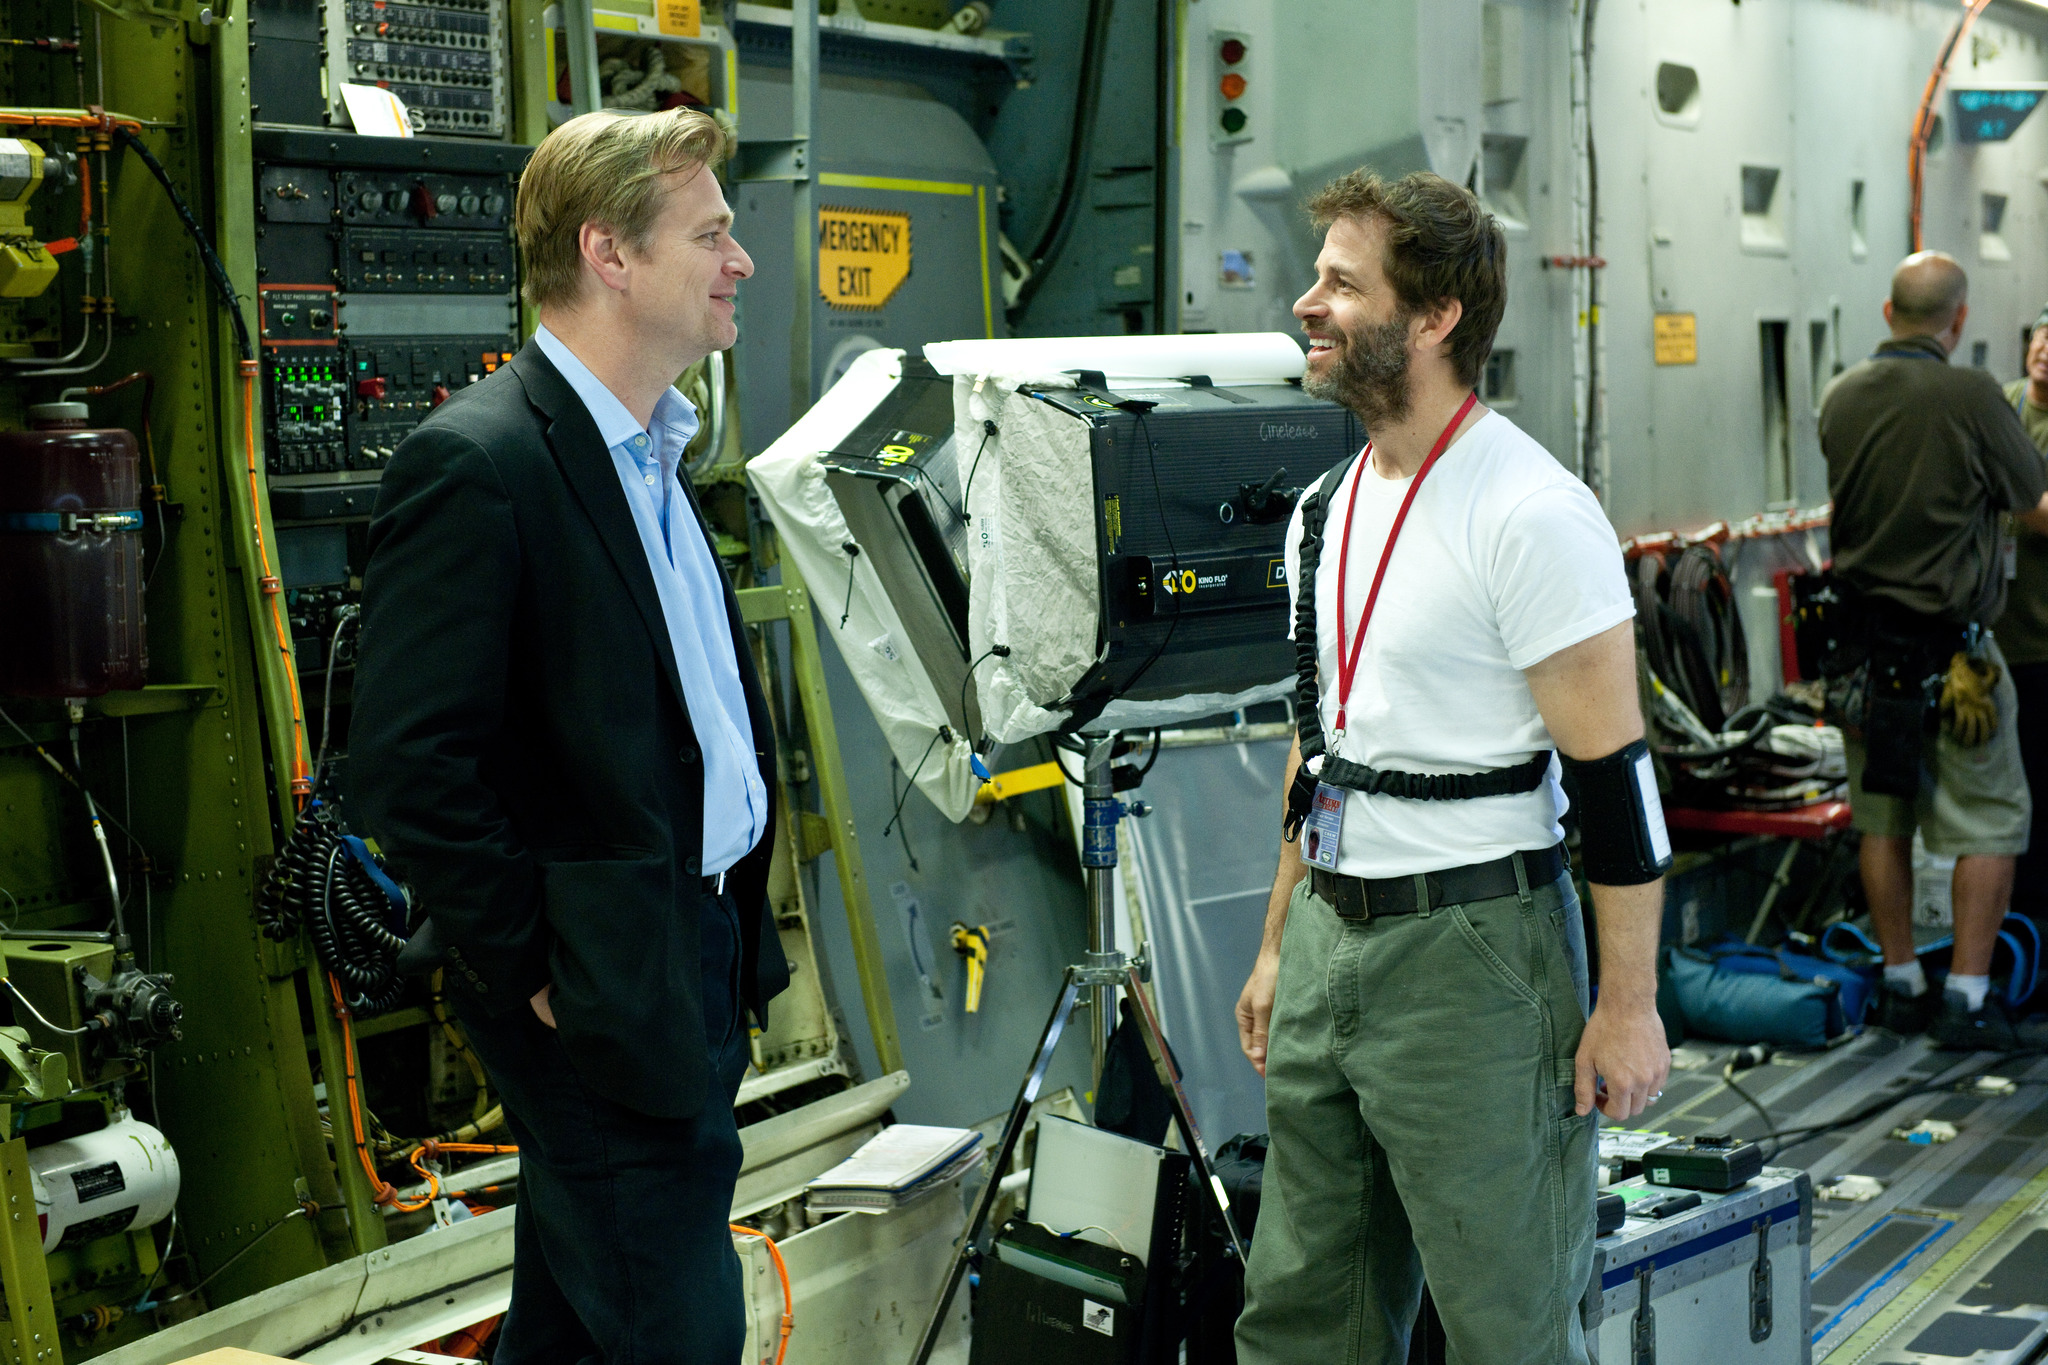 Christopher Nolan and Zack Snyder in Zmogus is plieno (2013)